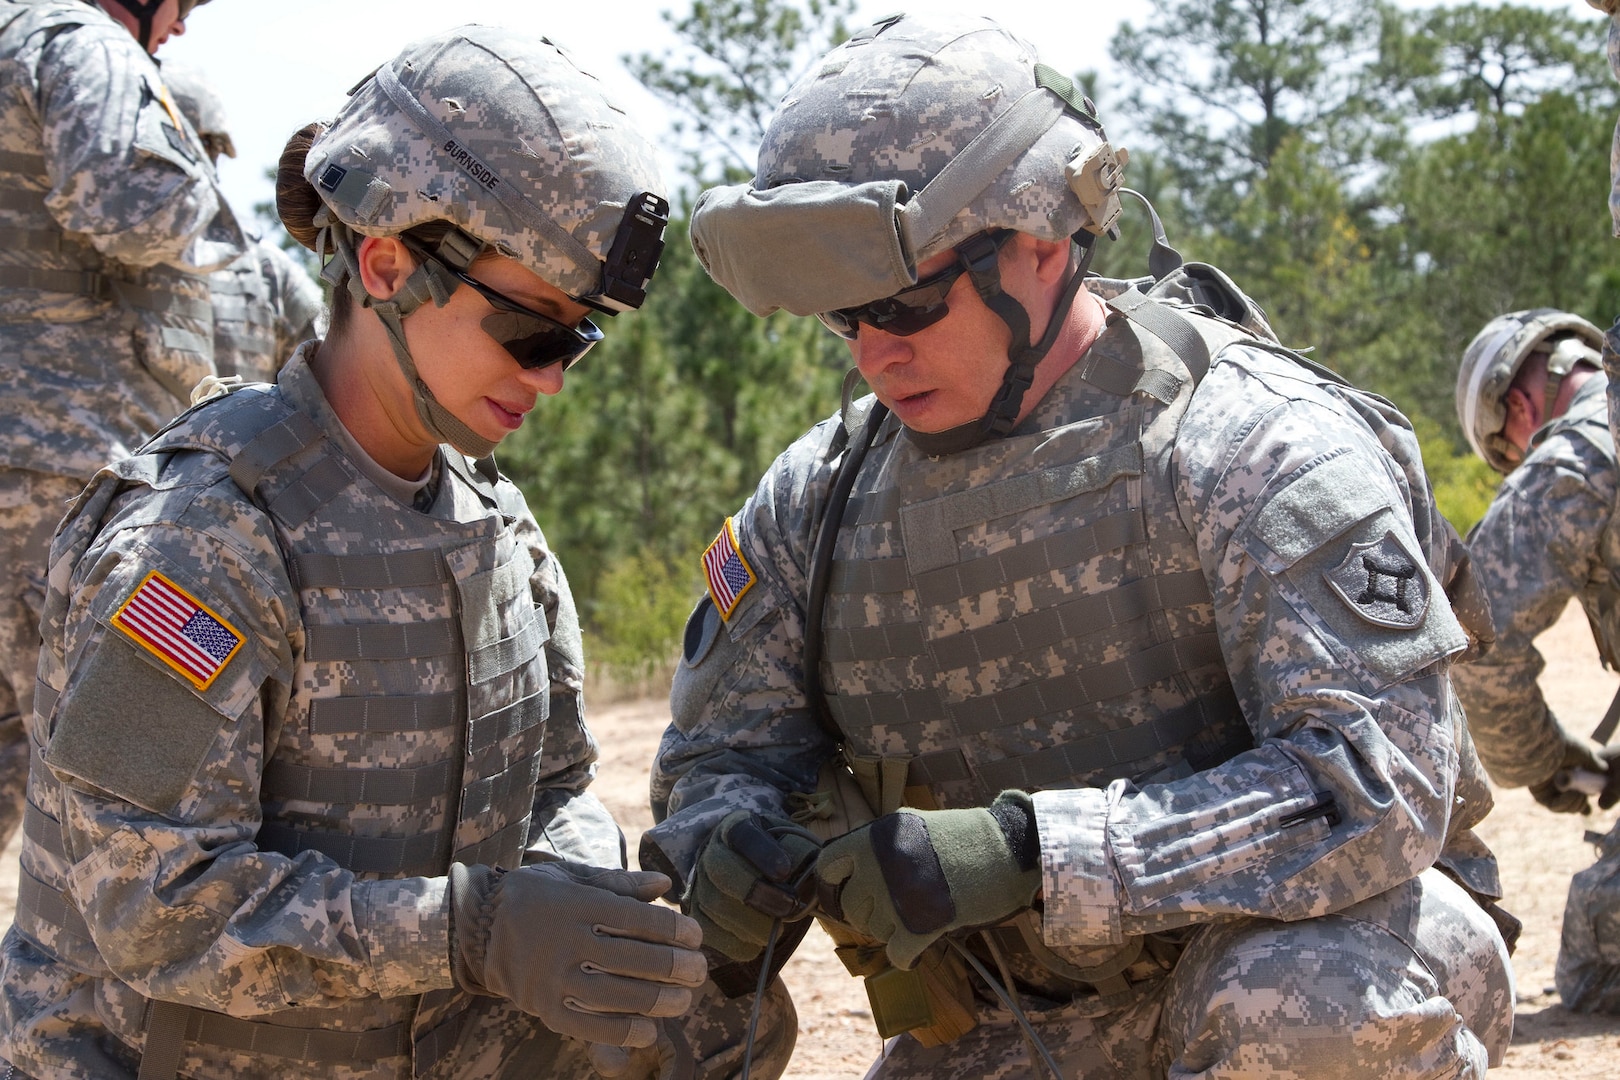 Florida National Guard members Spc. Maryi Burnside, left, and Sgt. Vic Harper, both with the 779th Engineer Battalion, prepare a piece of detonation cord with that will be attached to a block of Composition C4, April 10, 2016, at McCrady Training Center. Two blocks of C4 were attached to a 40-pound crater charge and lowered into a previously created hole, which will be set off to create a crater obstacle. Soldiers learned numerous new techniques during a two-week Combat Engineer Course, reclassifying as 12B at McCrady Training Center. 